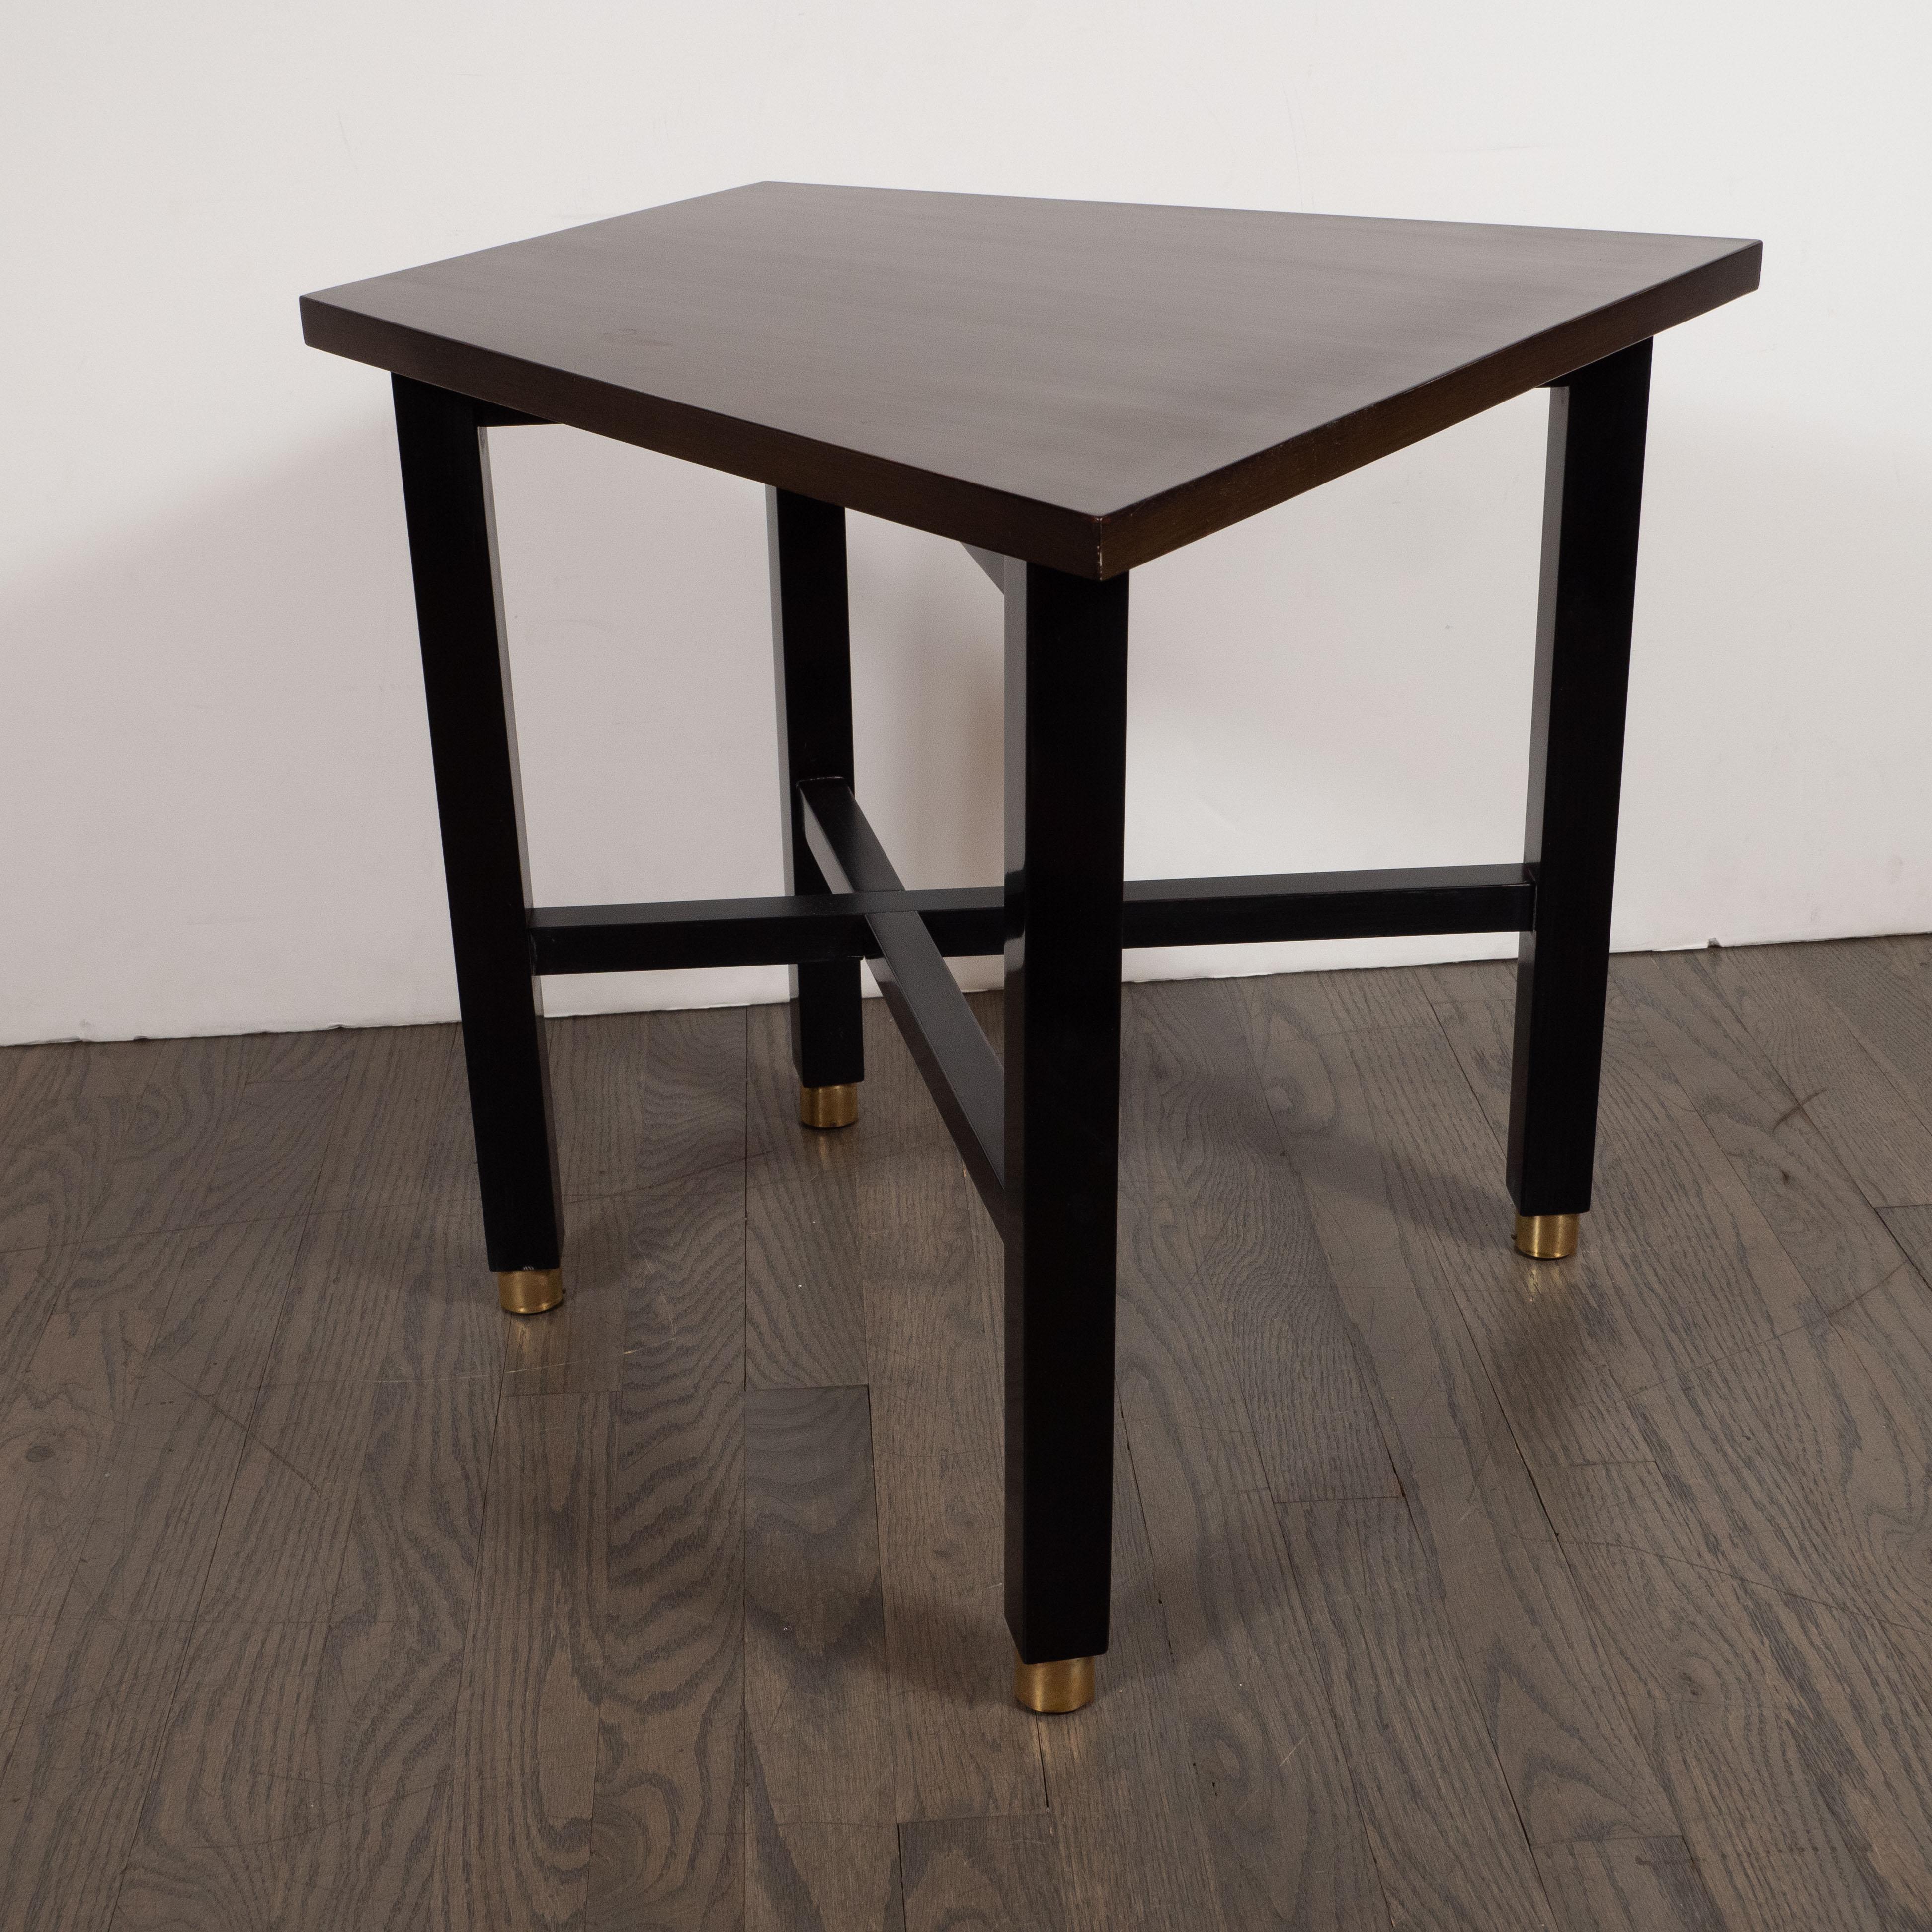 Mid-Century Modern Trapezoidal Walnut Side Table with Brass Sabots by Dunbar In Excellent Condition For Sale In New York, NY